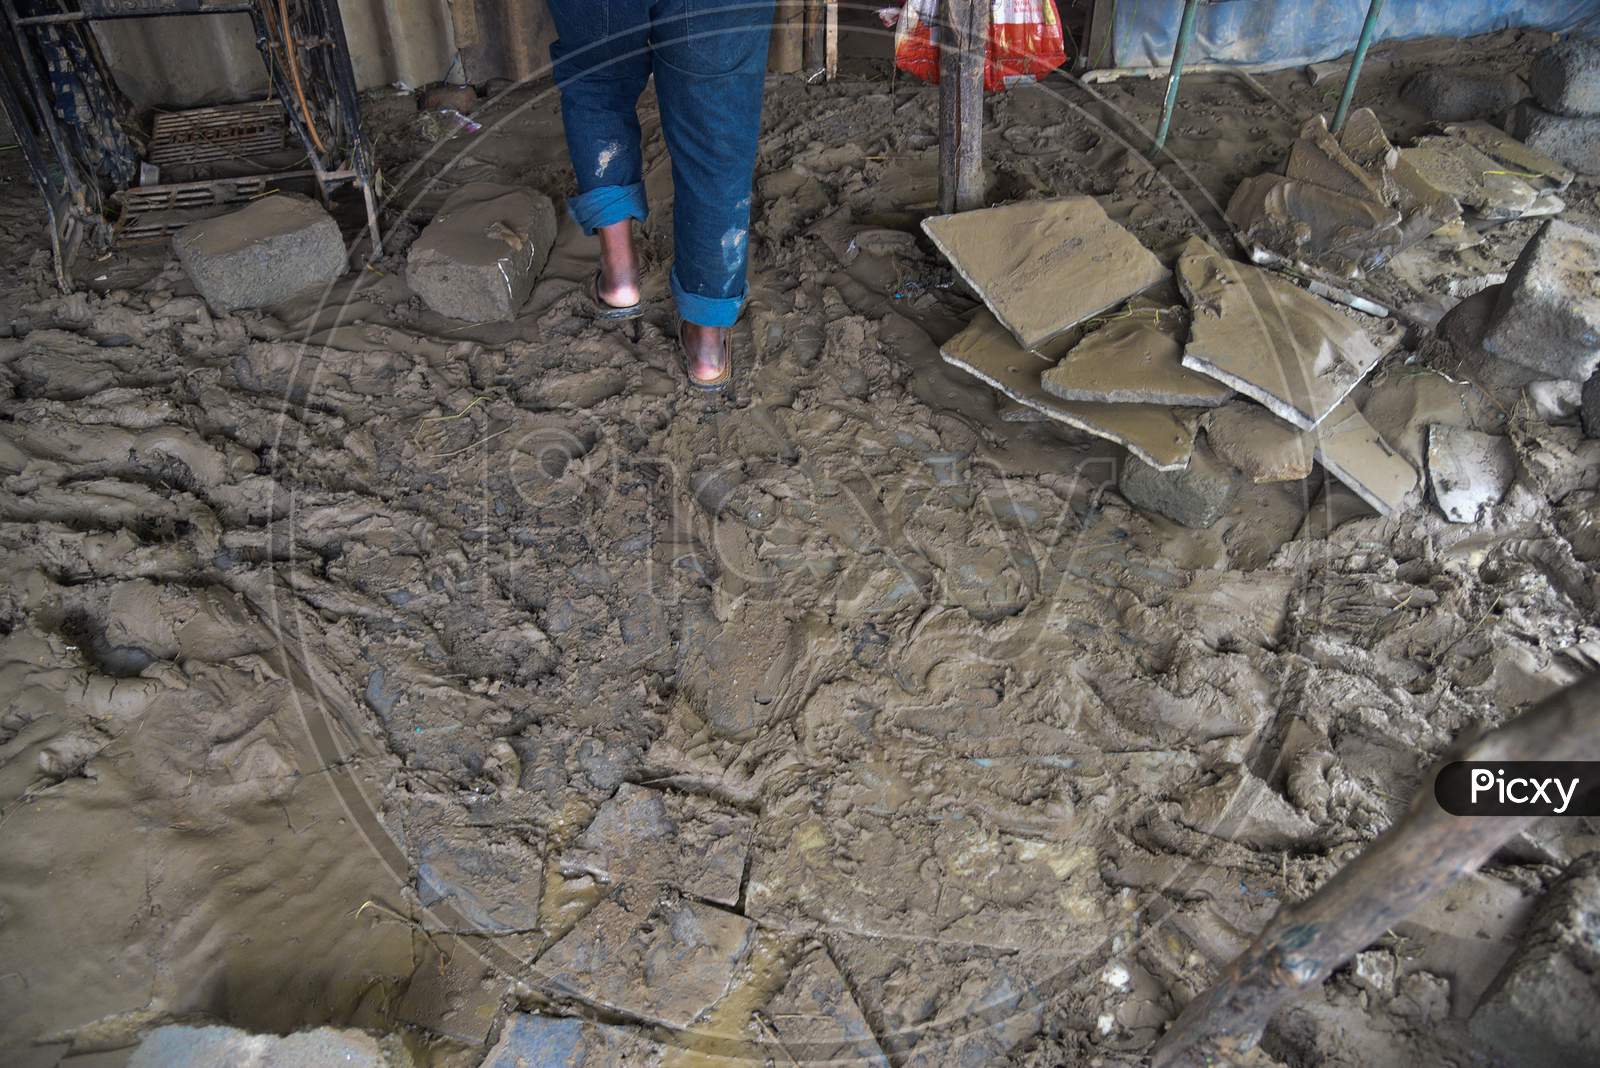 People clean up the mud that accumulated in their home caused by the flash floods in warangal, August 18, 2020.